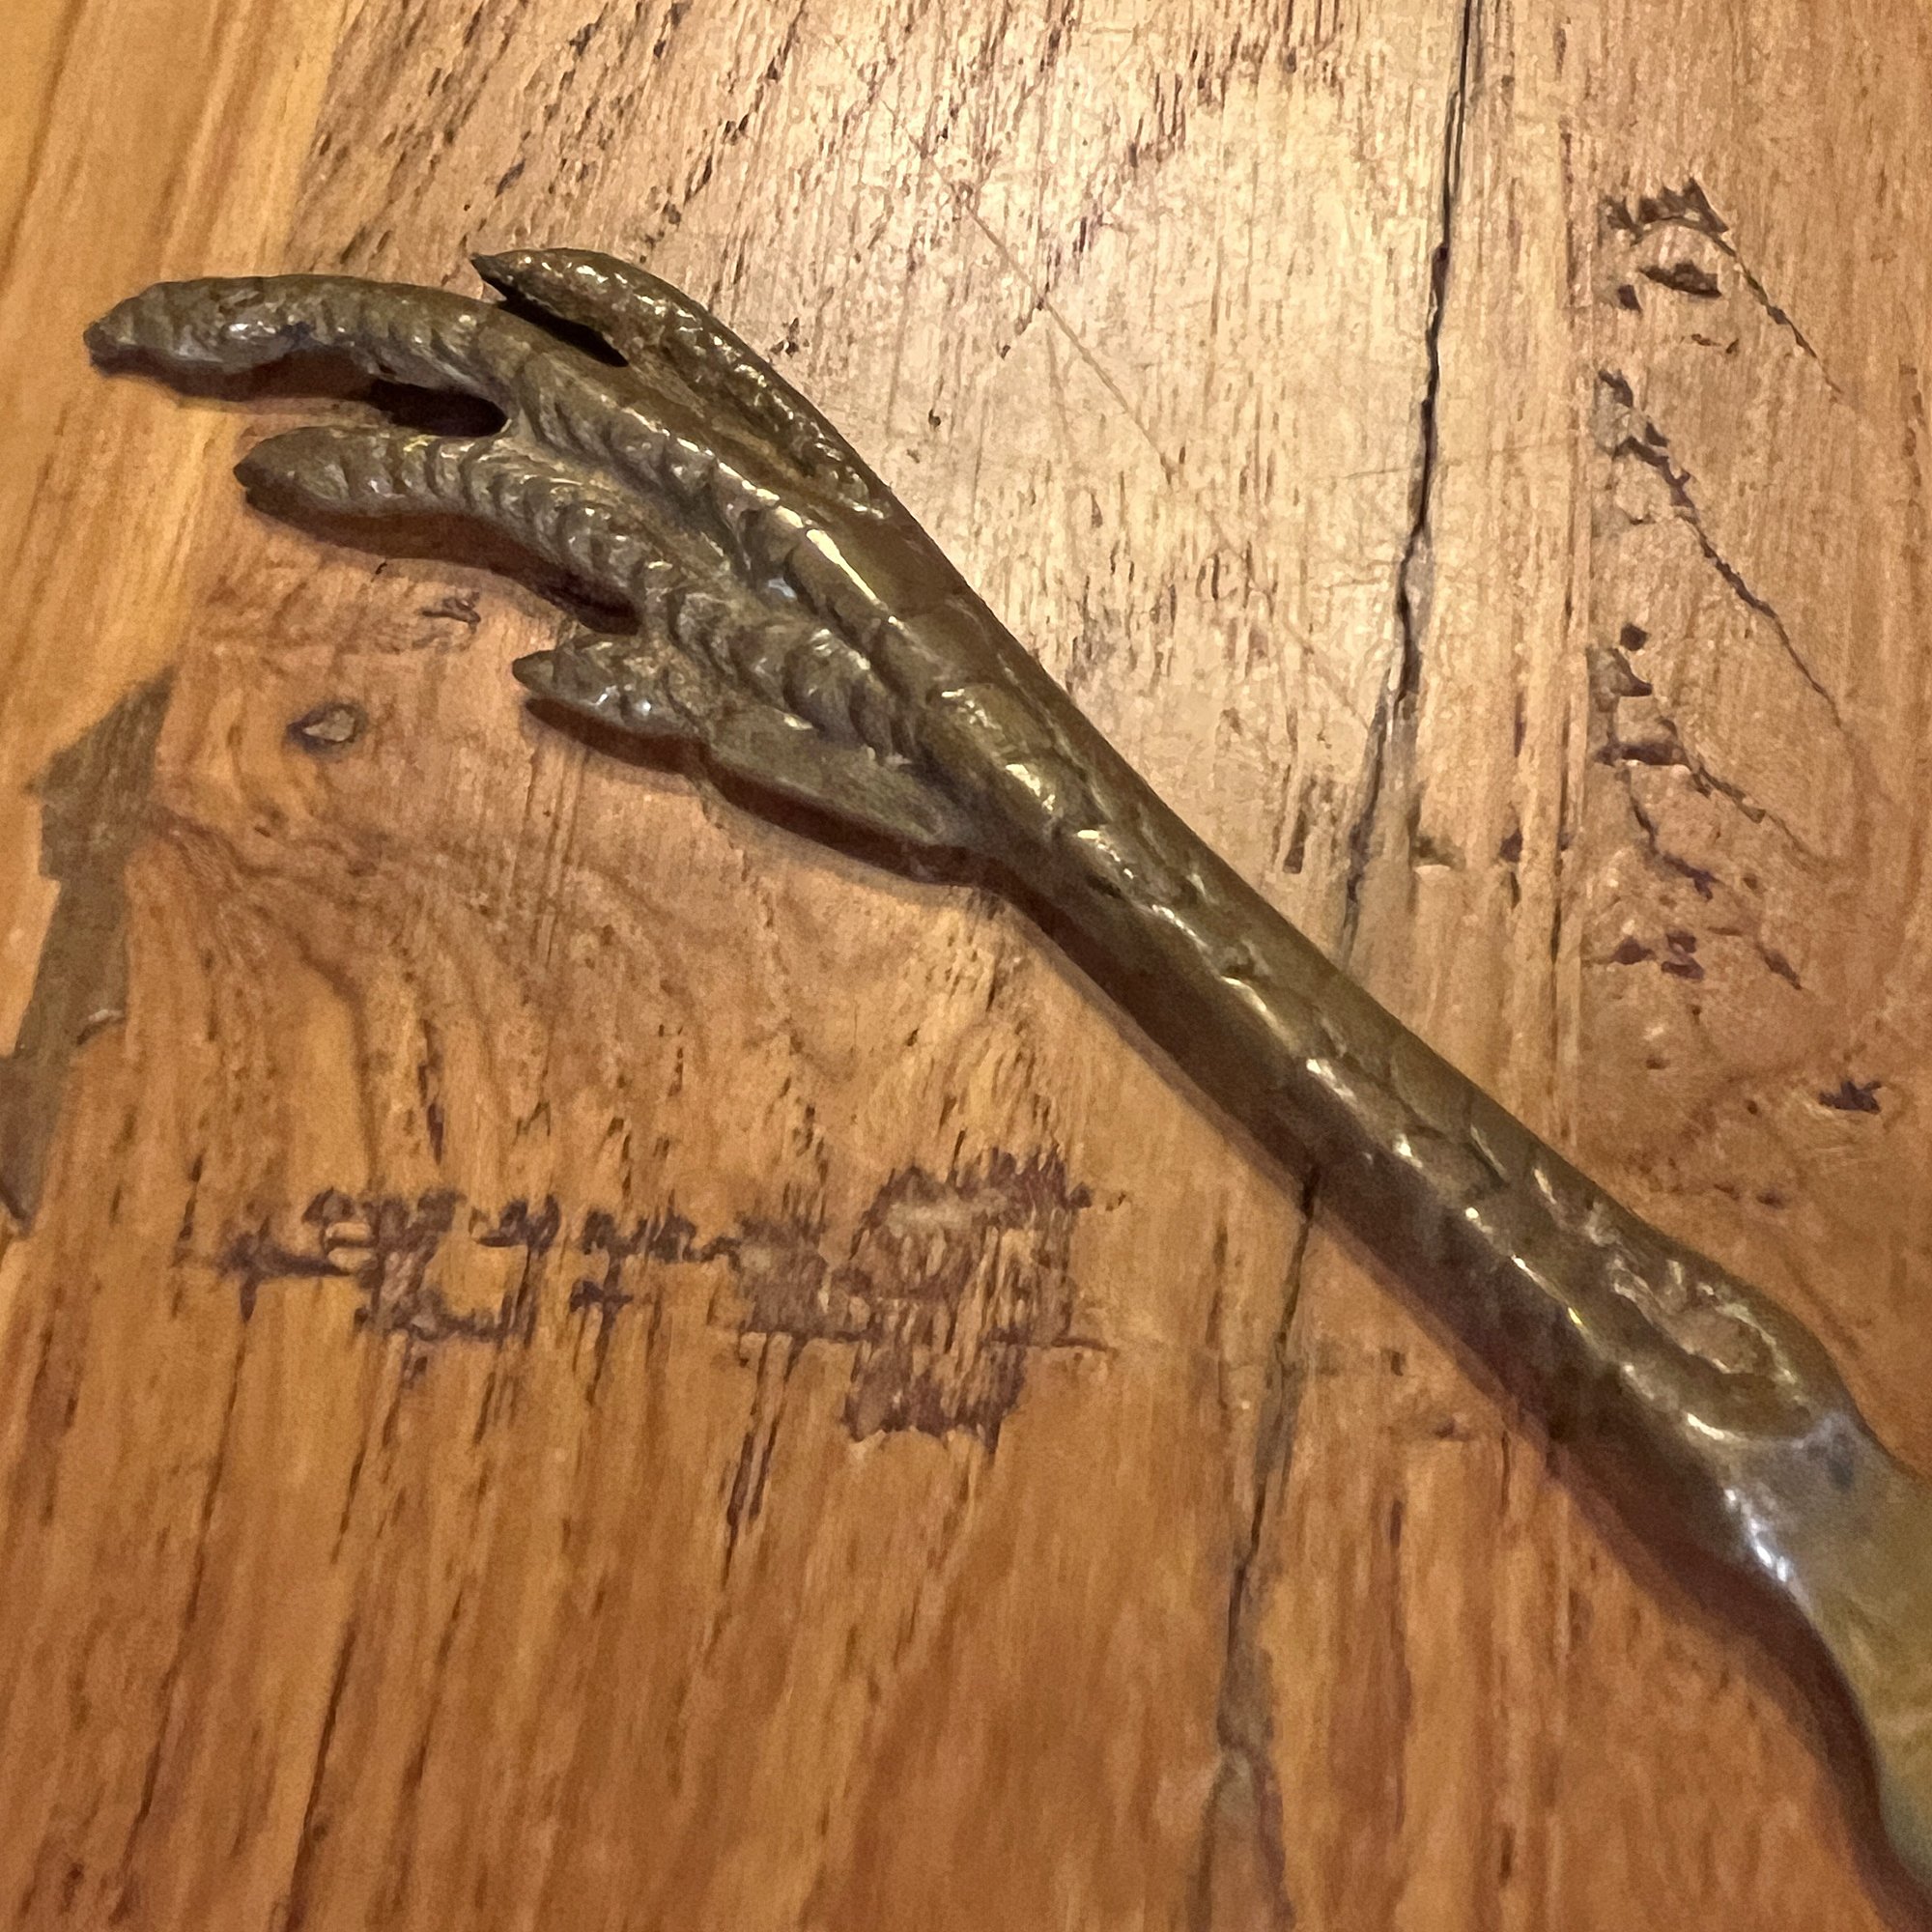 If you missed its Monday release, check out this brass chicken-foot knife/athame. We repaired a slight bend at the knife's tip and cleaned off ages of gunk in our workshop. Great for rootwork or hoodoo practitioners as well as green witches! Visit gr